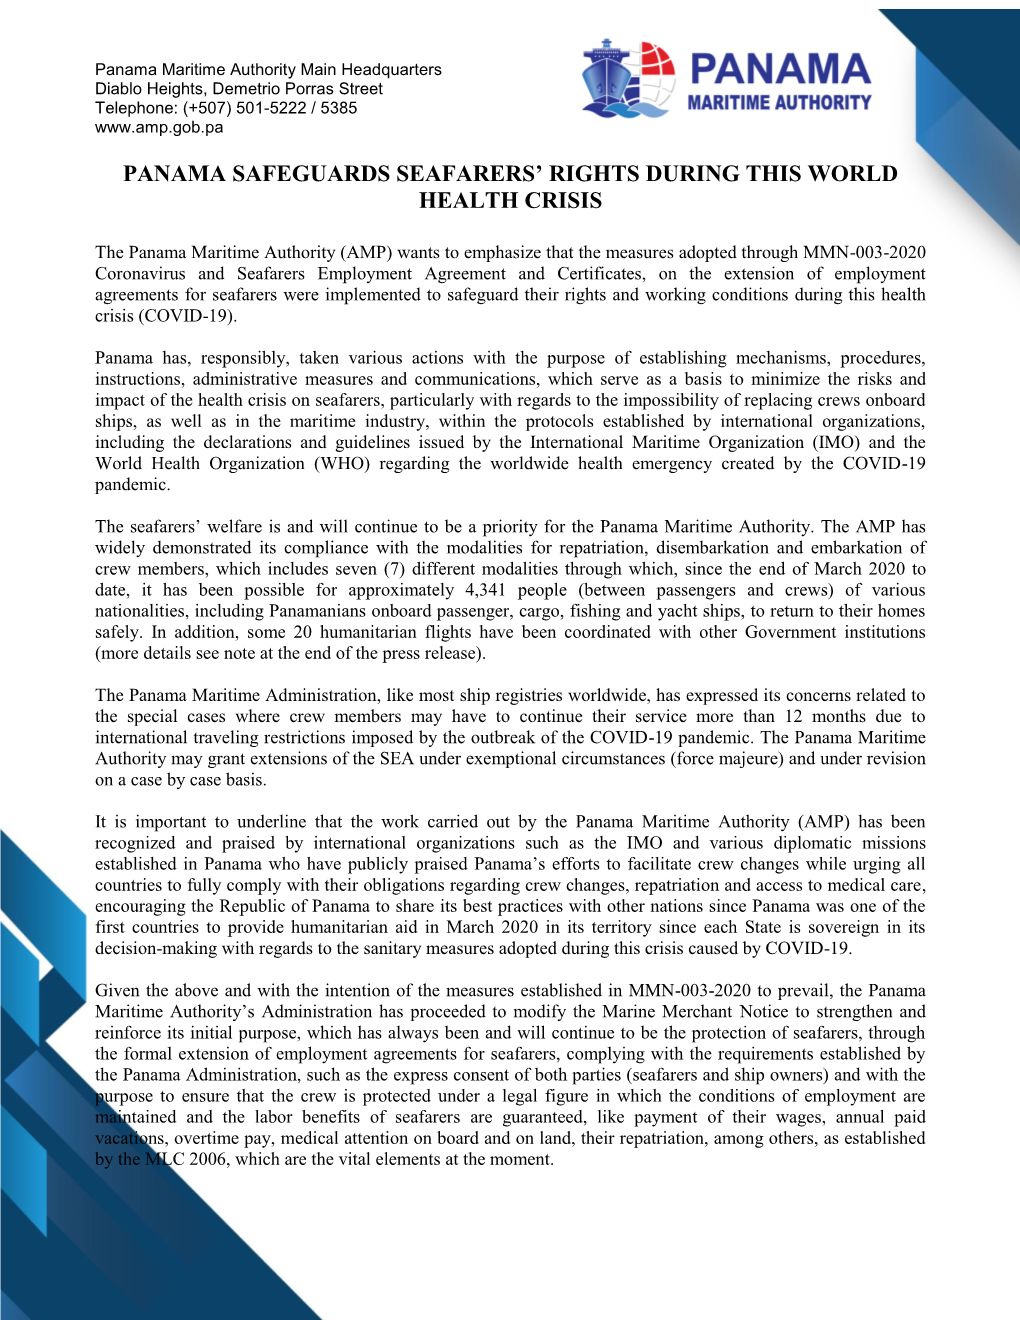 Panama Safeguards Seafarers' Rights During